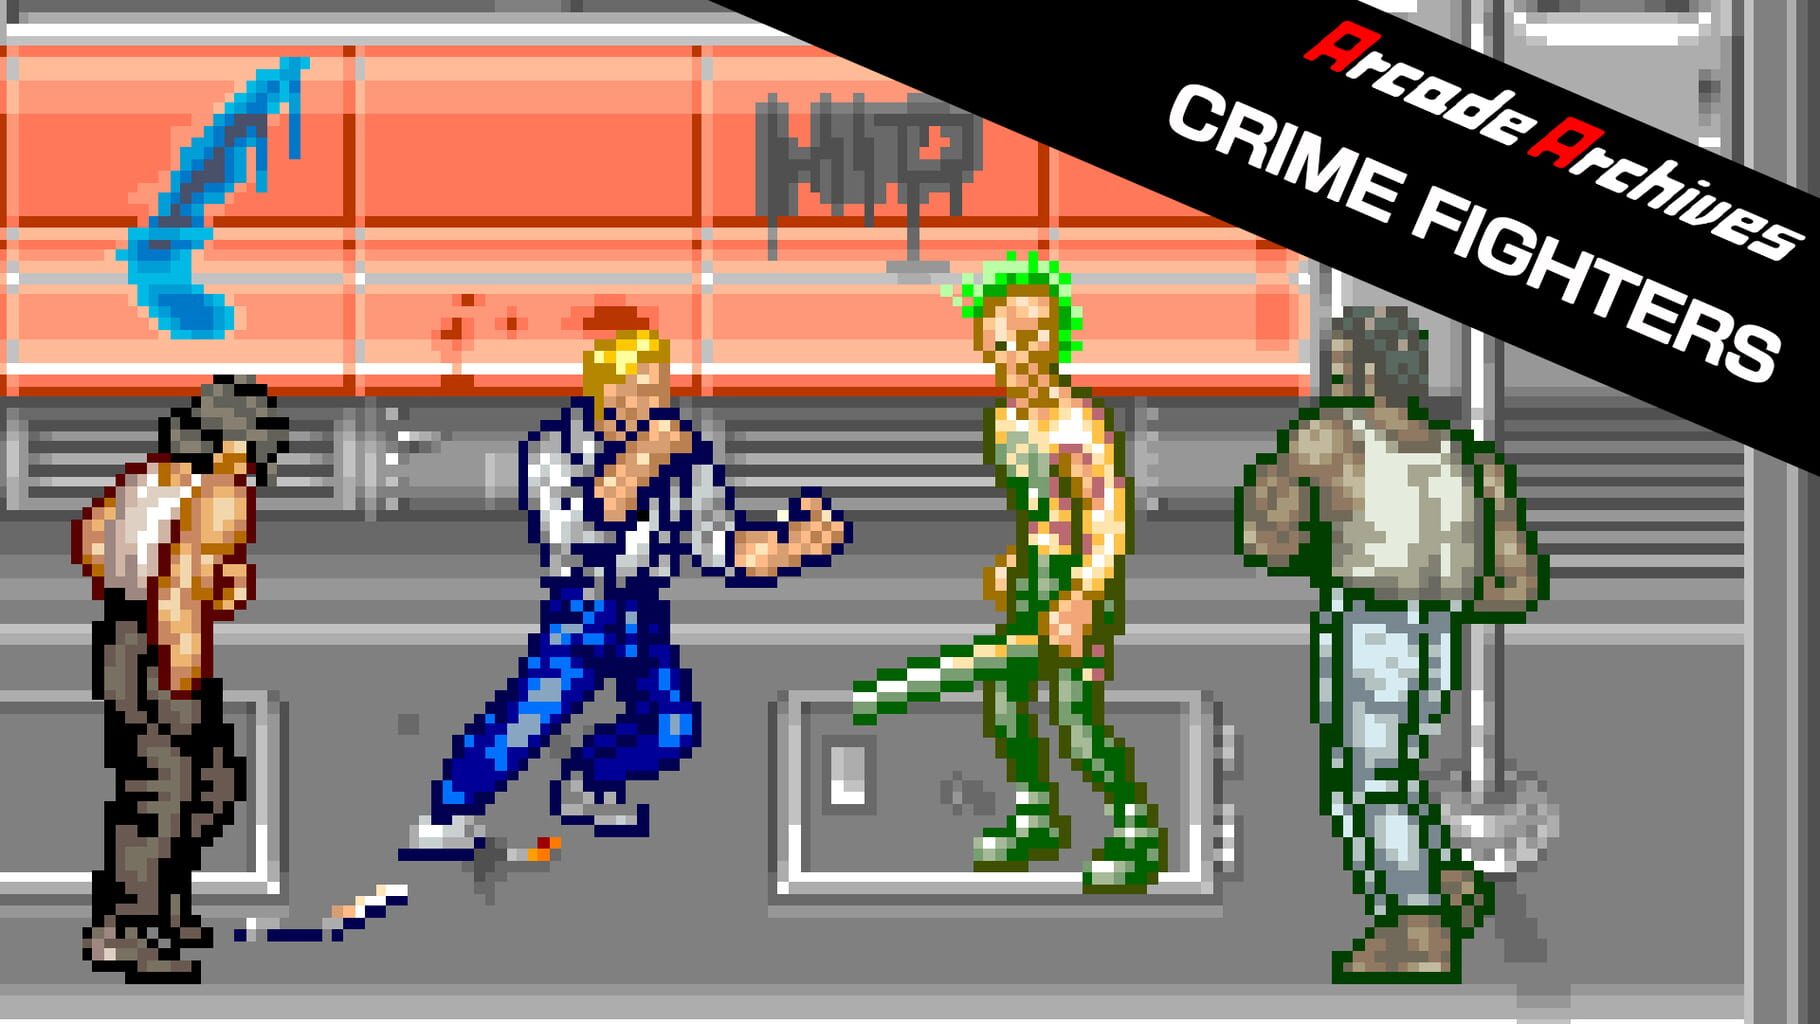 Arcade Archives: Crime Fighters artwork